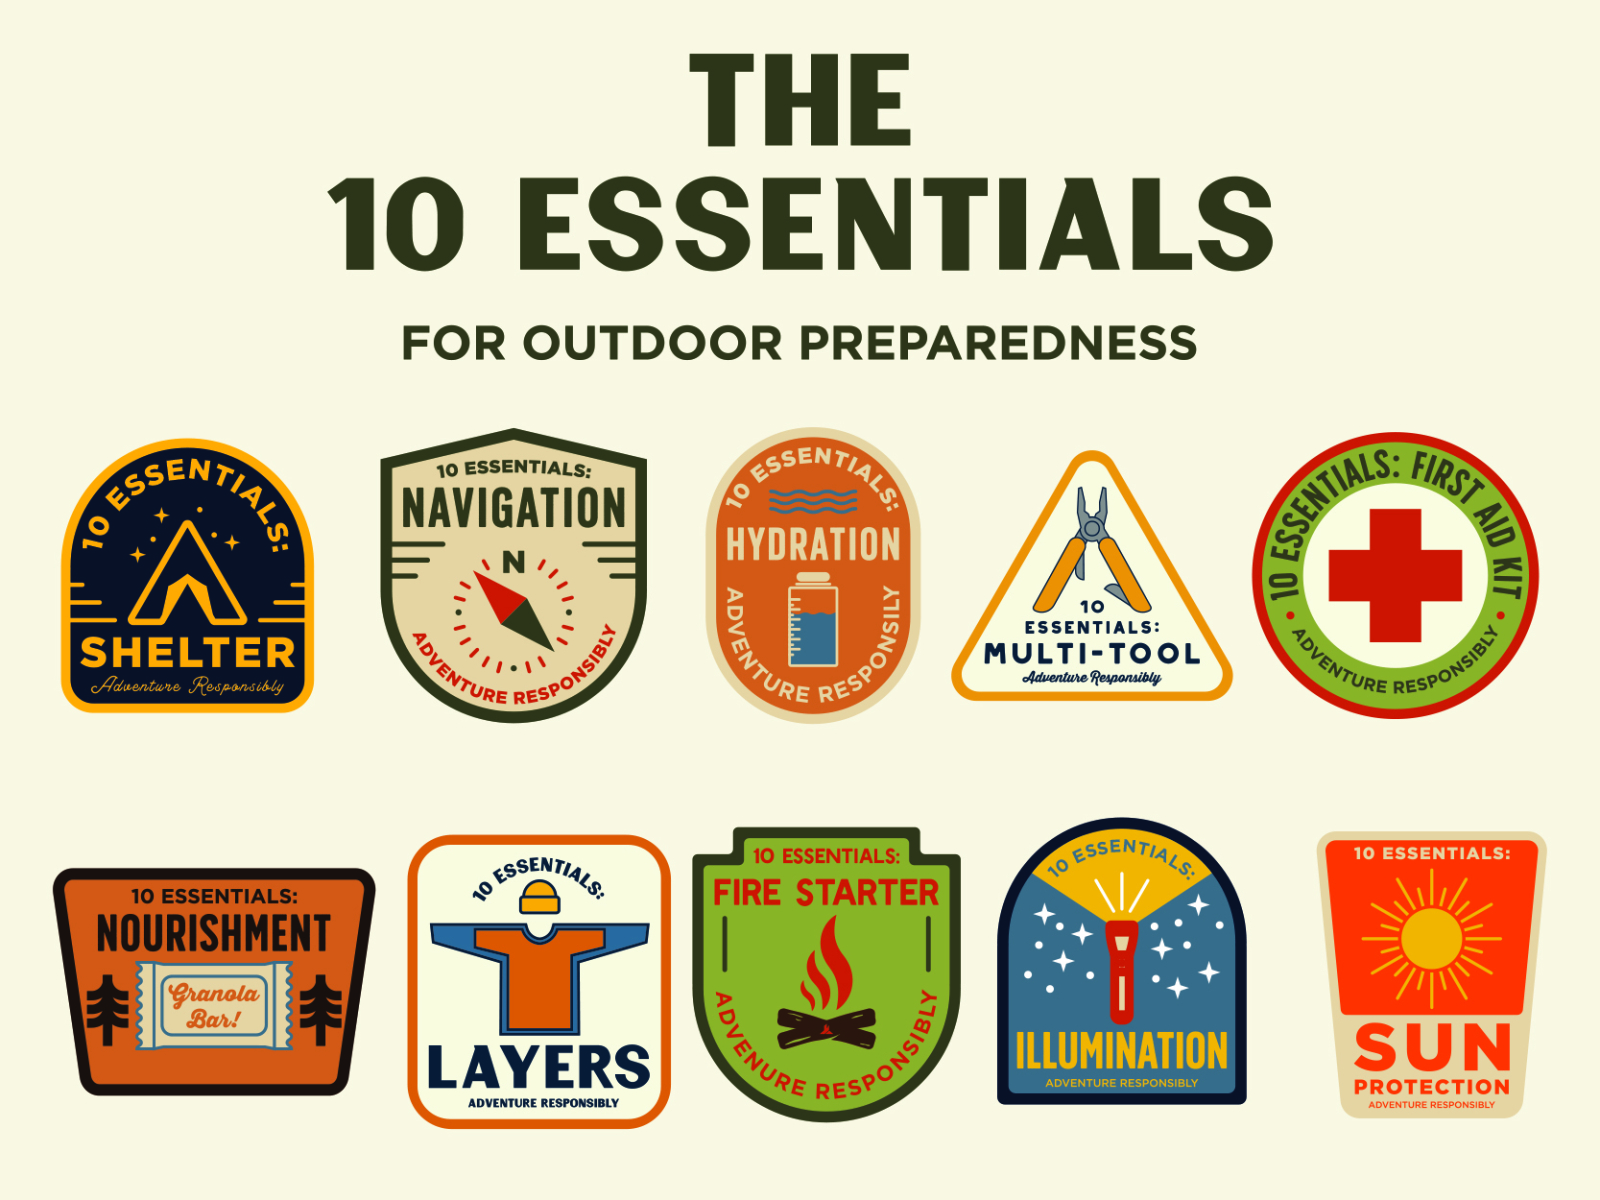 Ten Essentials by Phill Monson on Dribbble